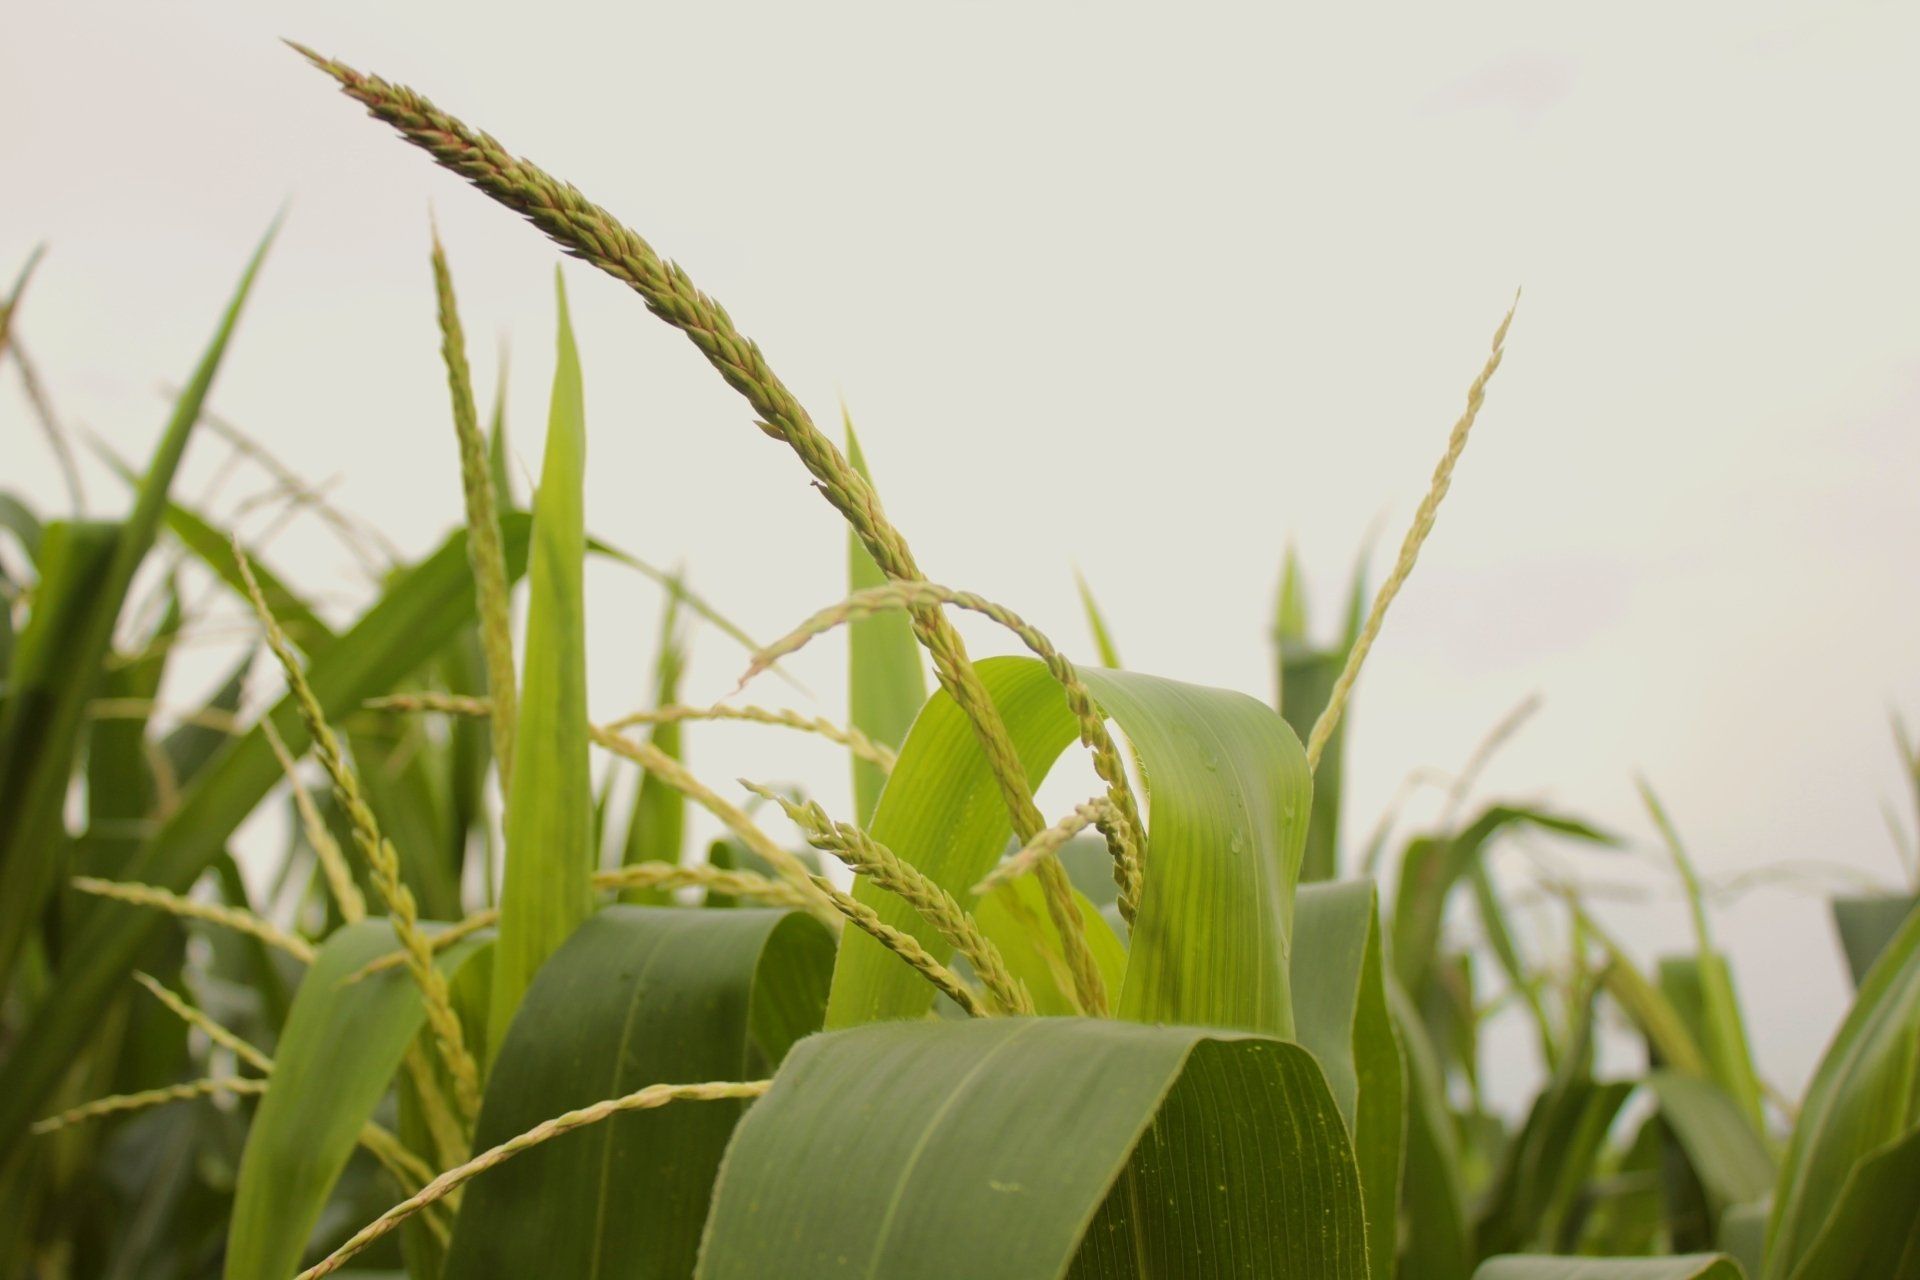 How can businesses reduce their carbon footprint with biosolvents made from corn?